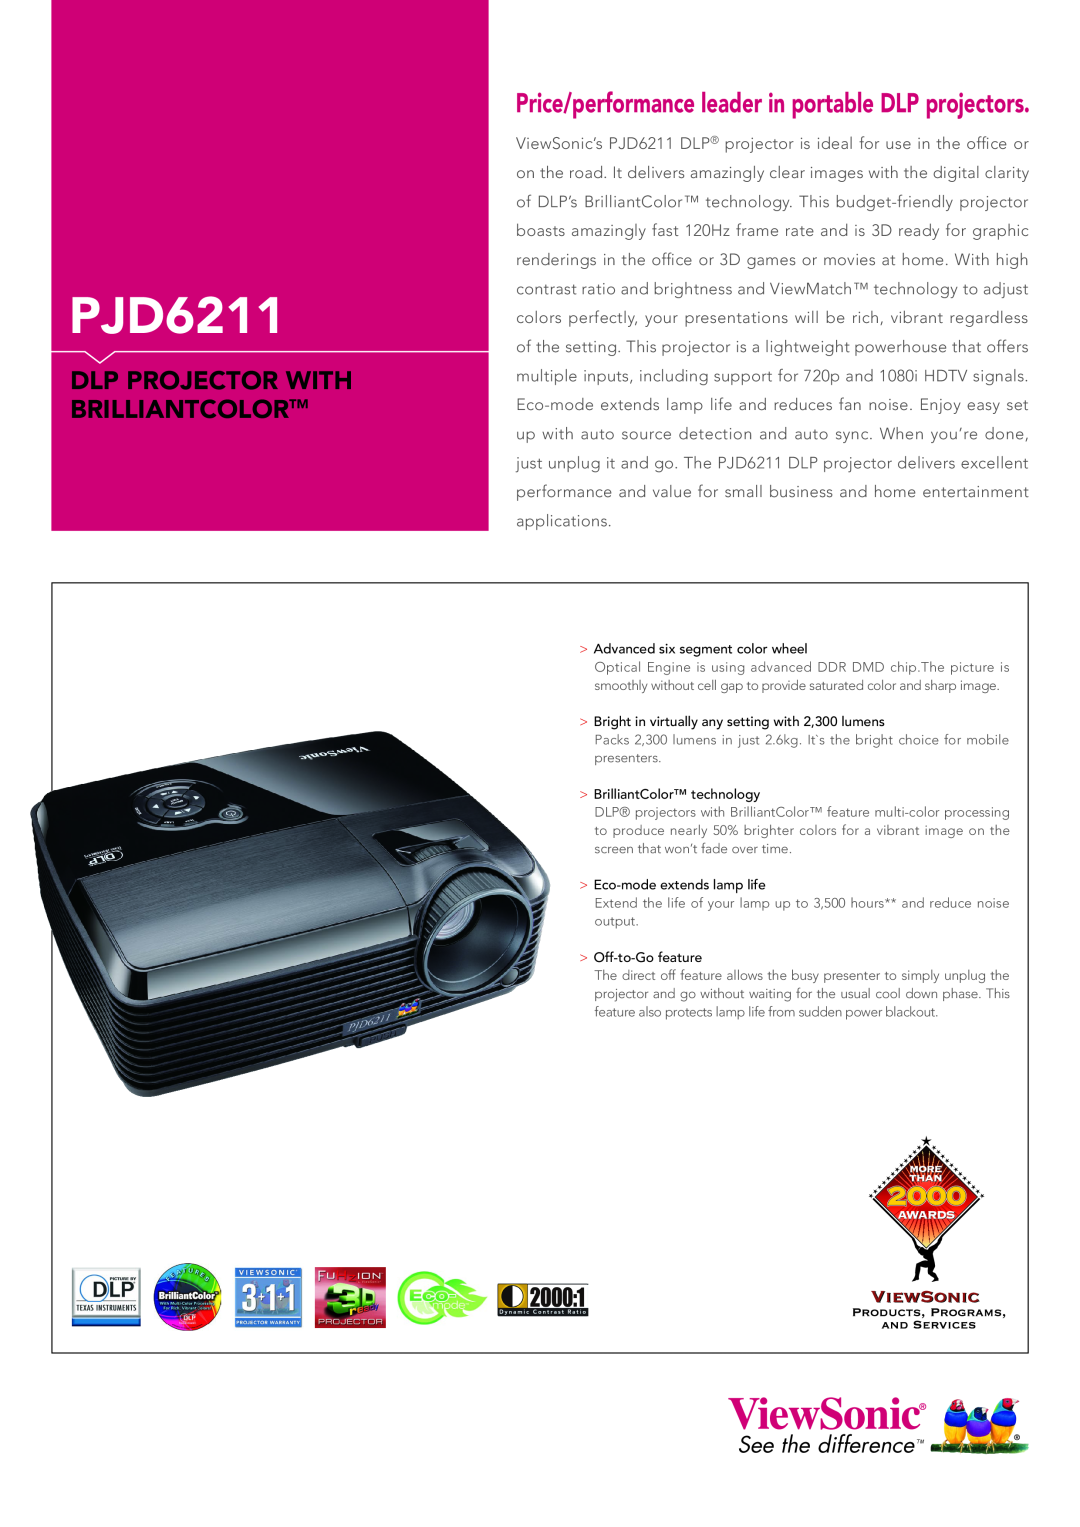 ViewSonic PJD6211 manual Dlp Projector With Brilliantcolortm, Price/performance leader in portable DLP projectors 